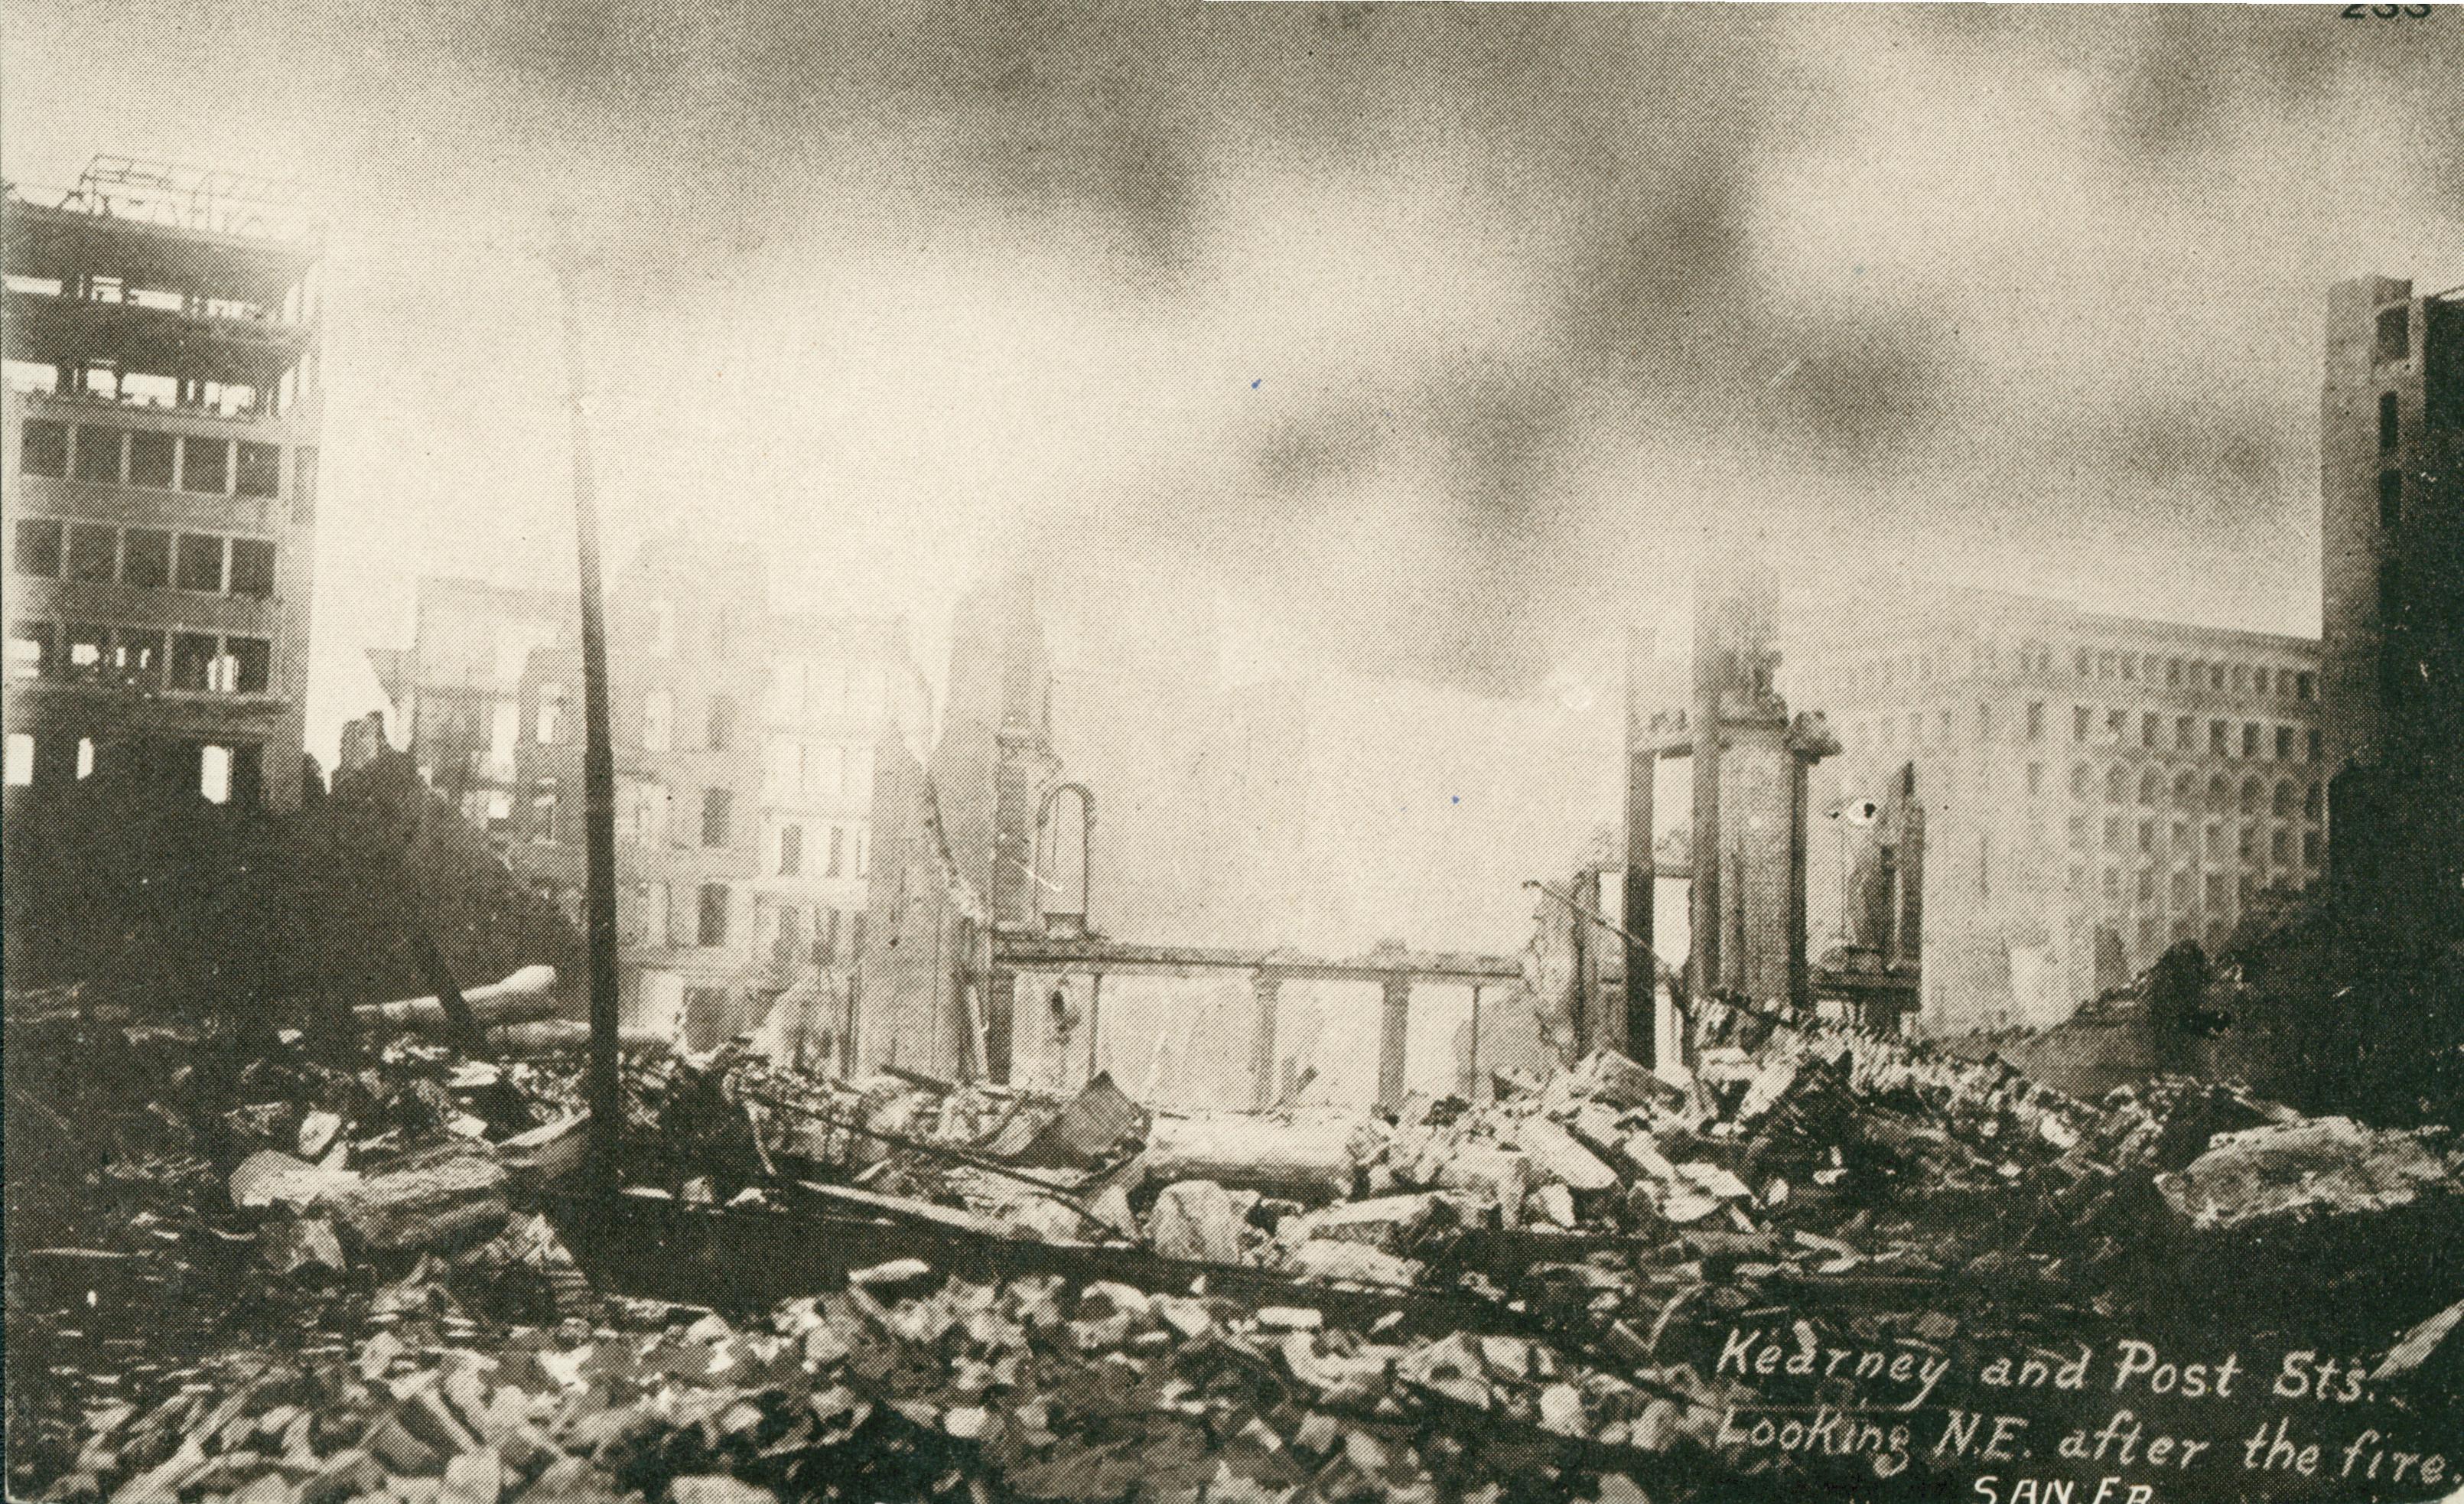 Shows a large pile of rubble with building standing in the background.